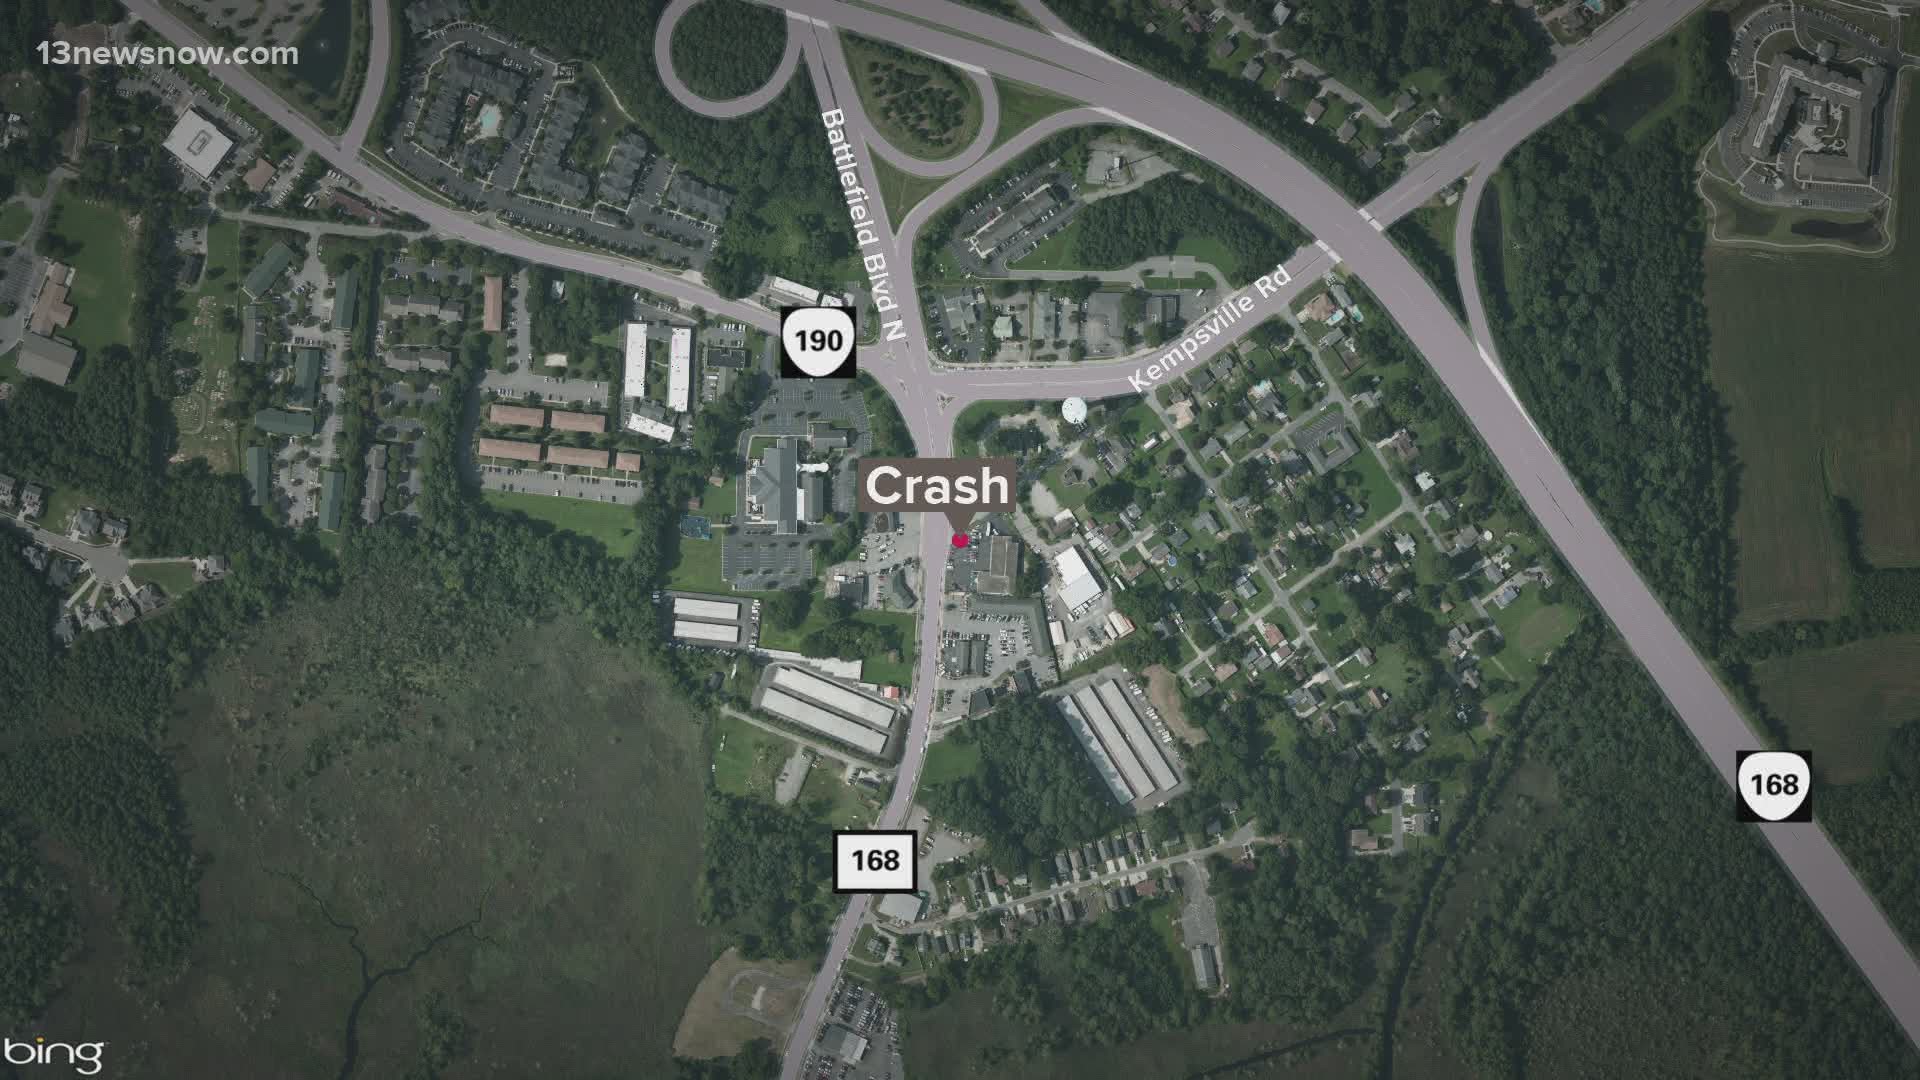 Police said James L. Scott, 61, died in the hospital after crashing on a motorcycle in the 100 block of Kempsville Road. It happened in someone's front yard.